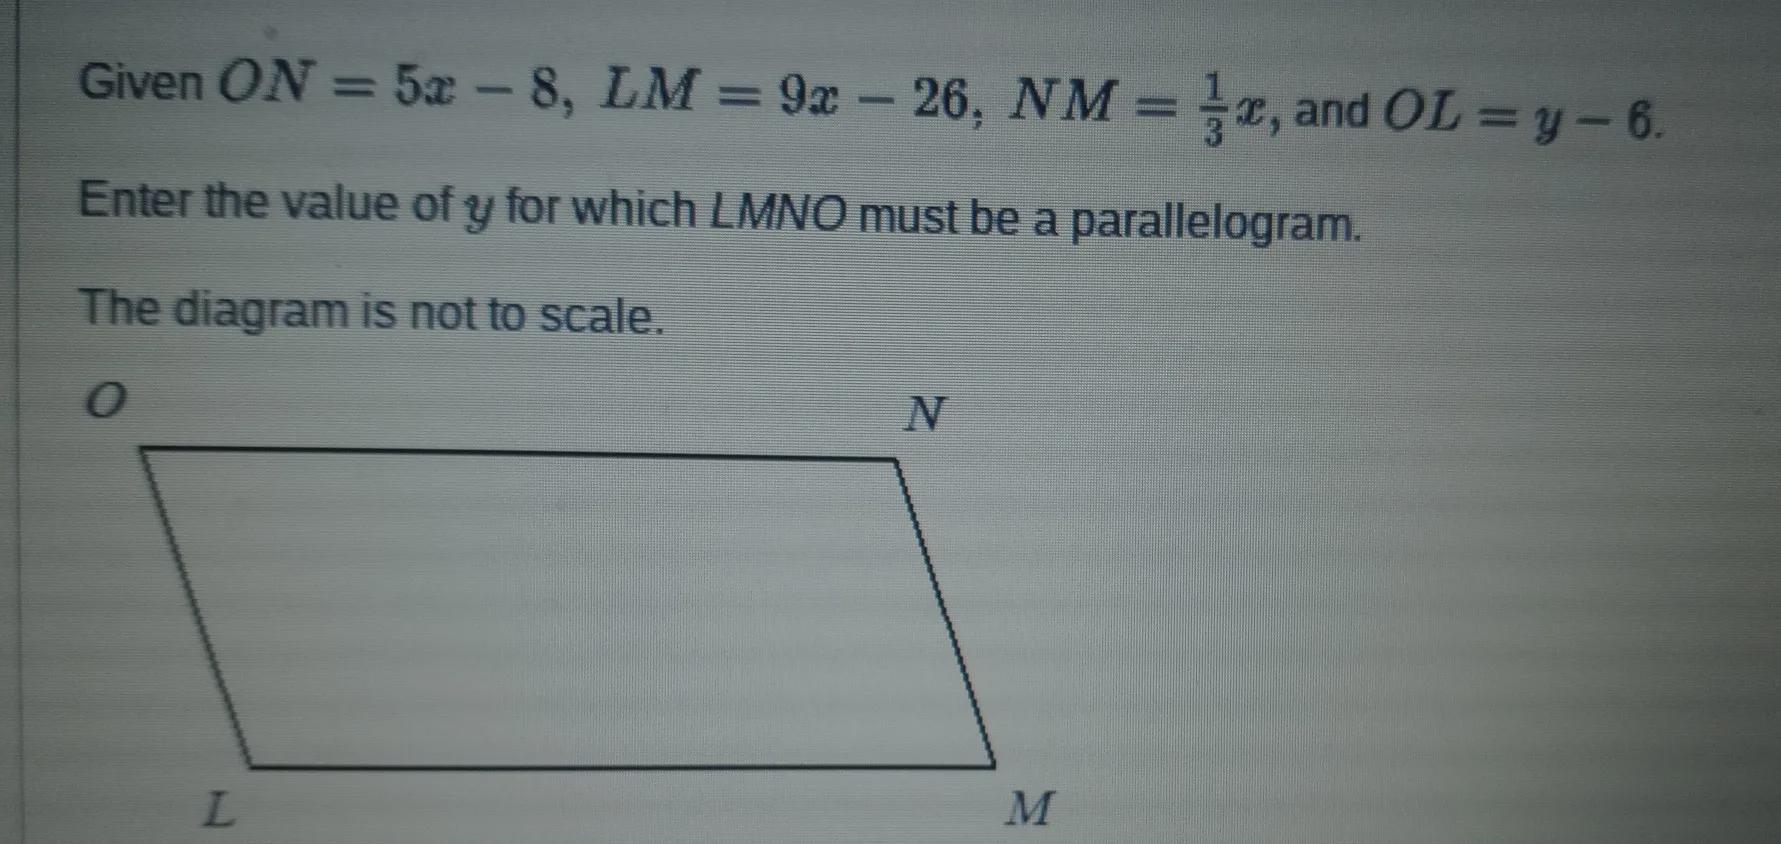 Enter The Value Of Y For Which LMNO Must Be A Parallelogram